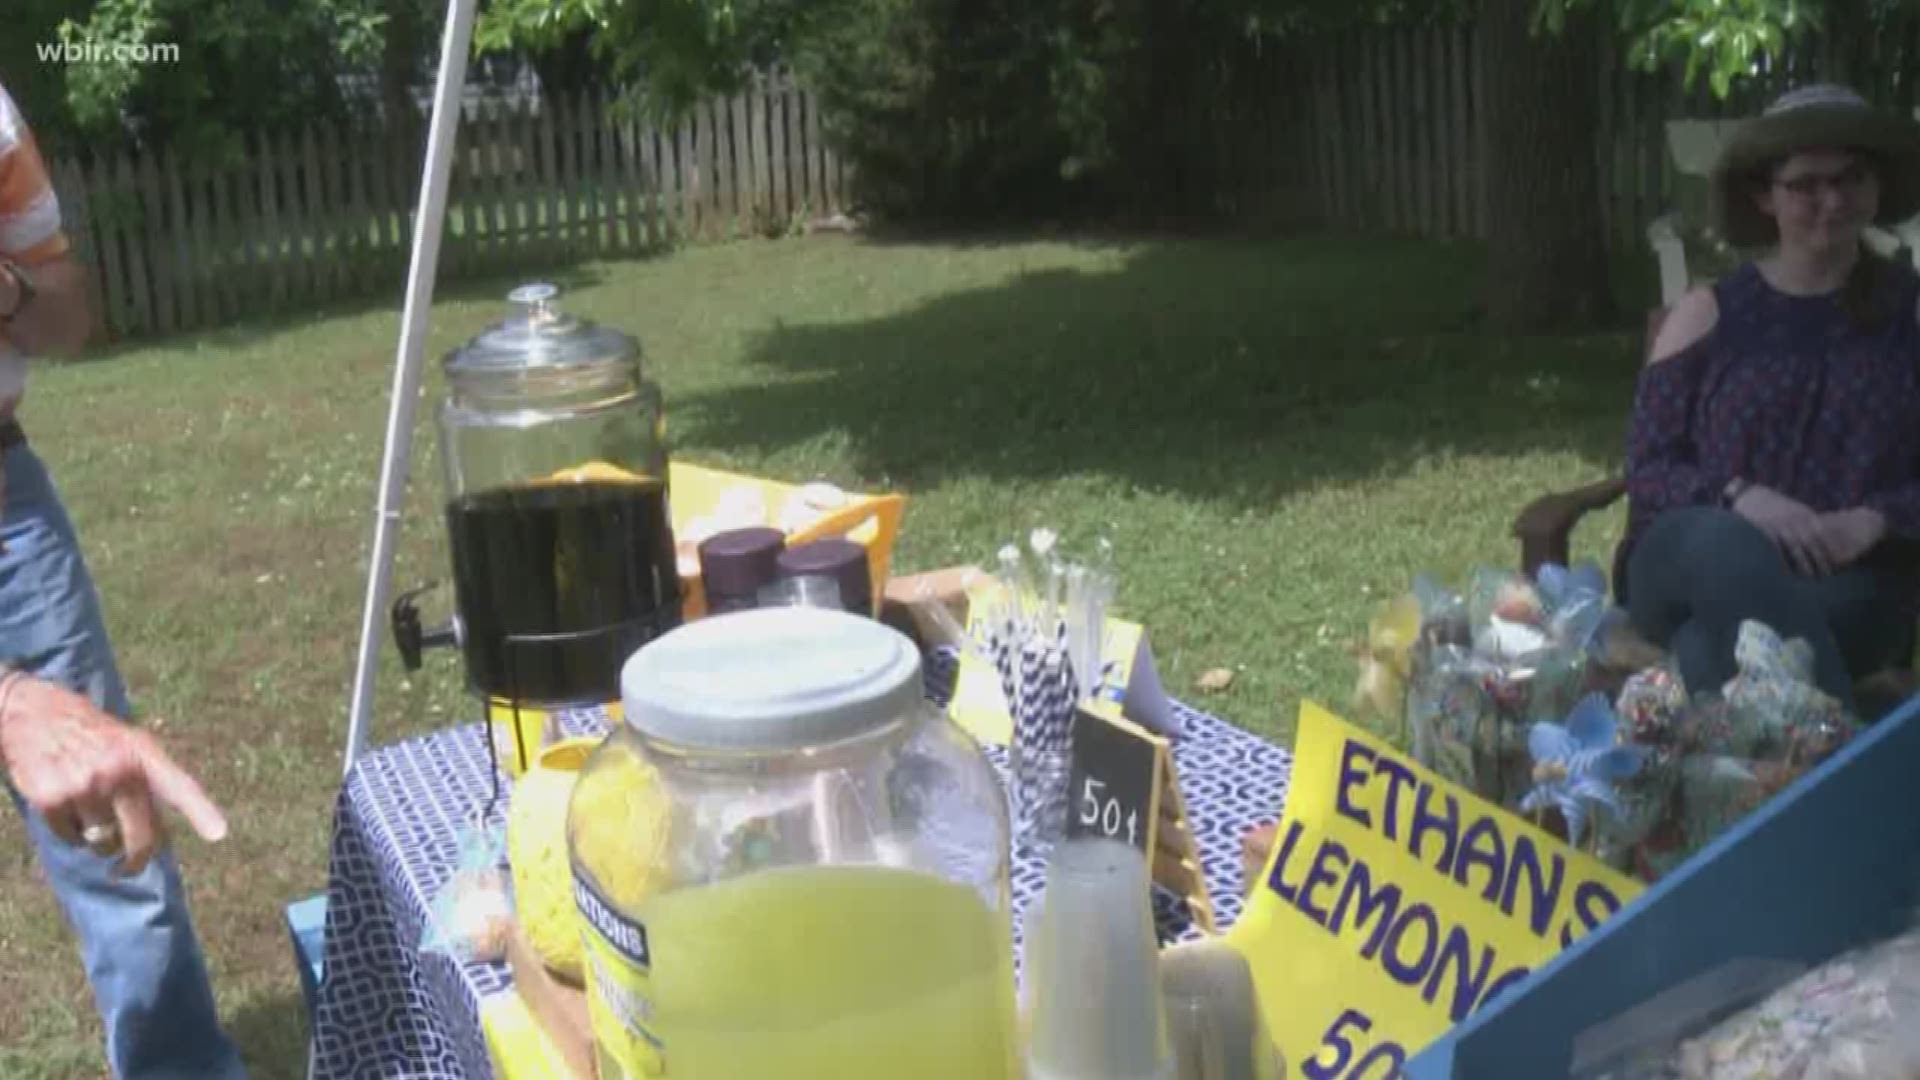 One local boy spent his 7th birthday by helping others.